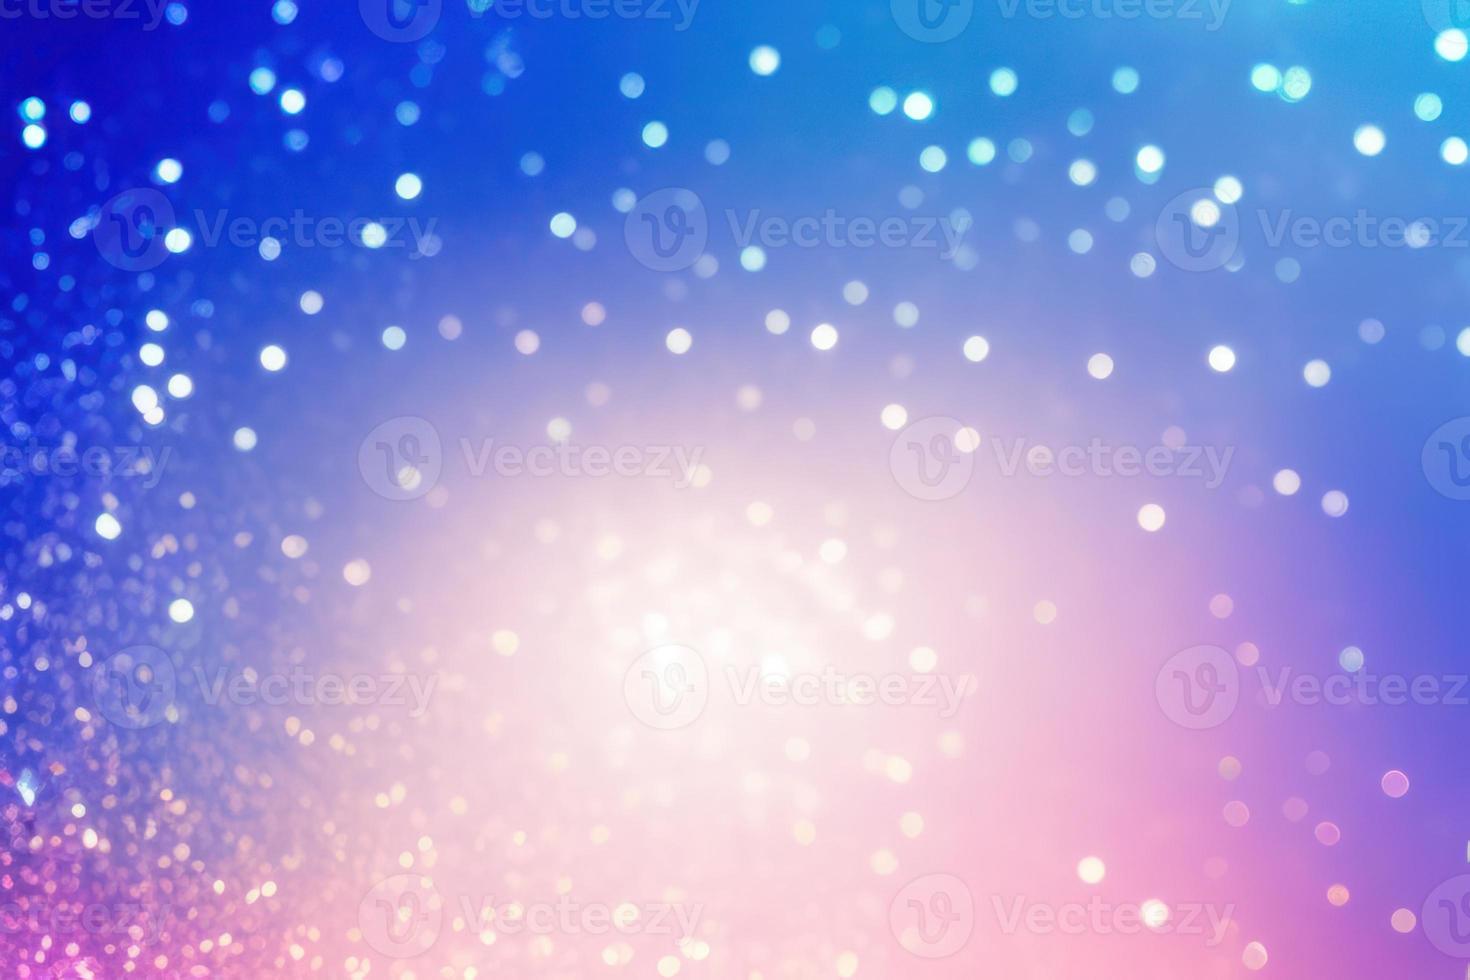 dreamy background with blue and red color, bokeh and sparkles, gradient backdrop photo